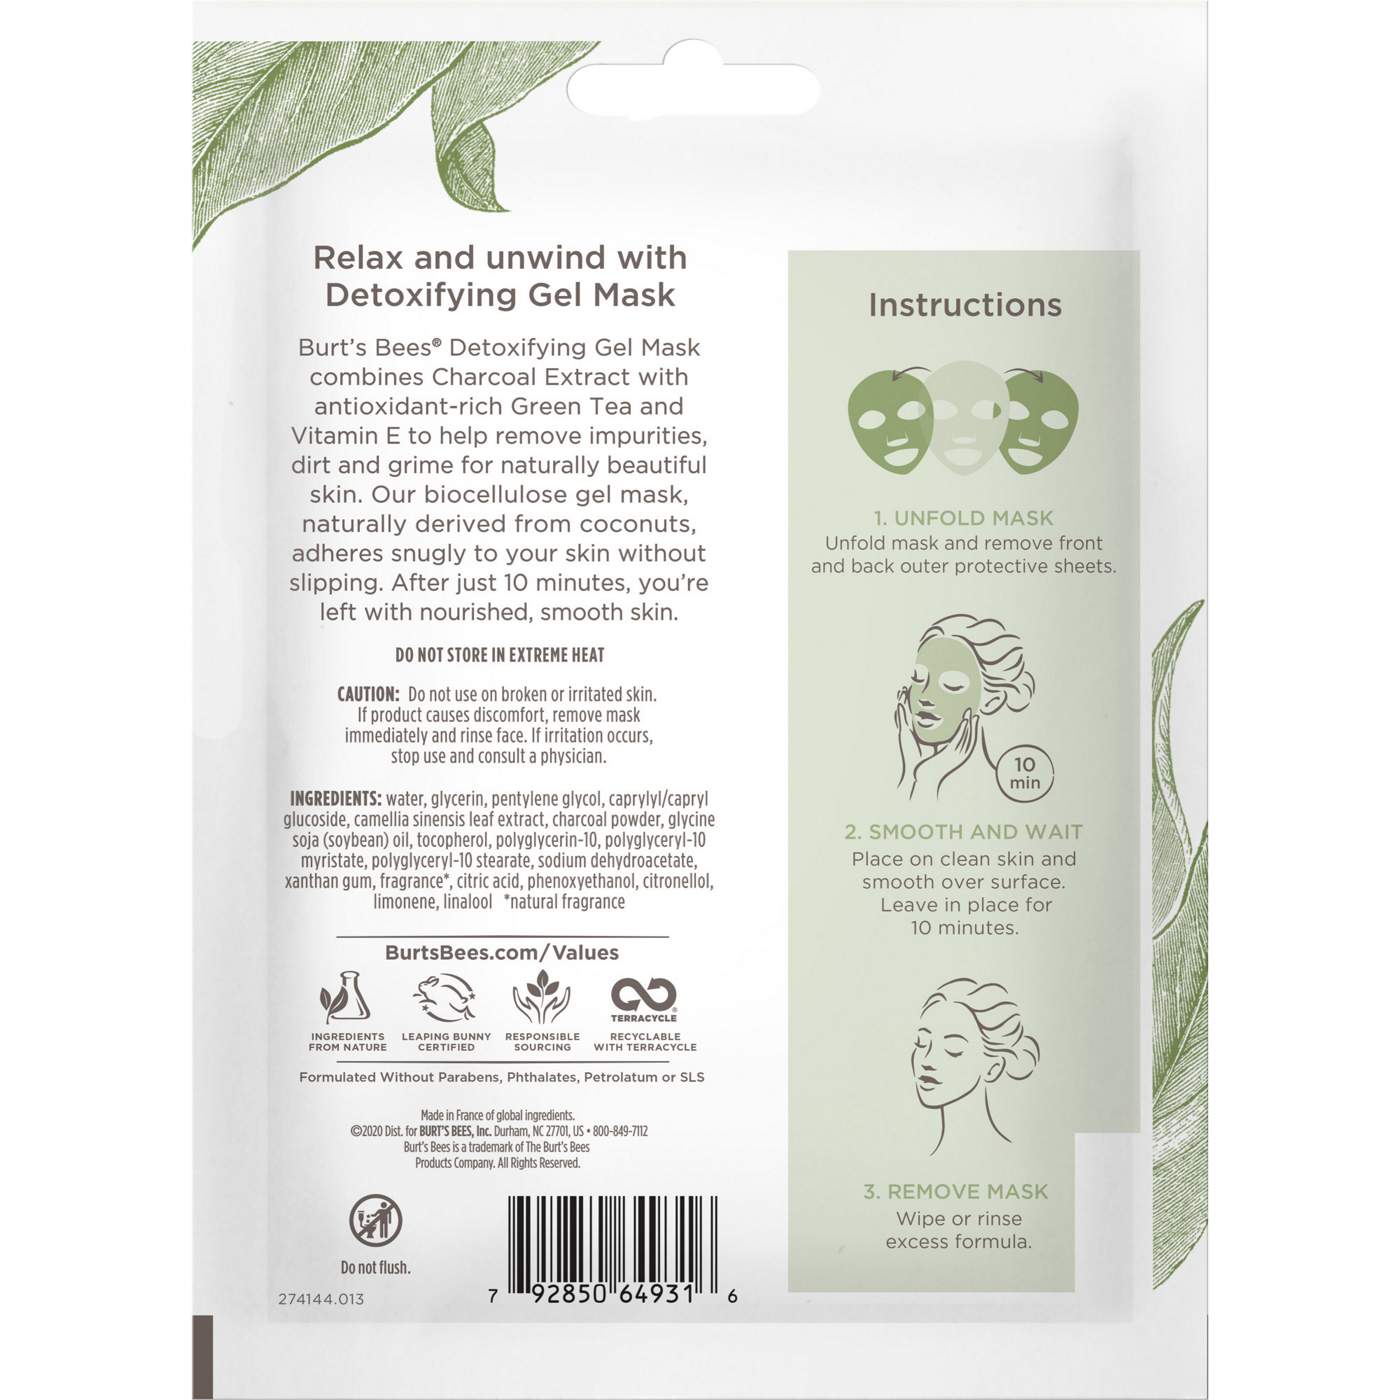 Burt's Bees Detoxifying Biocellulose Gel Mask with Charcoal and Green Tea; image 5 of 6